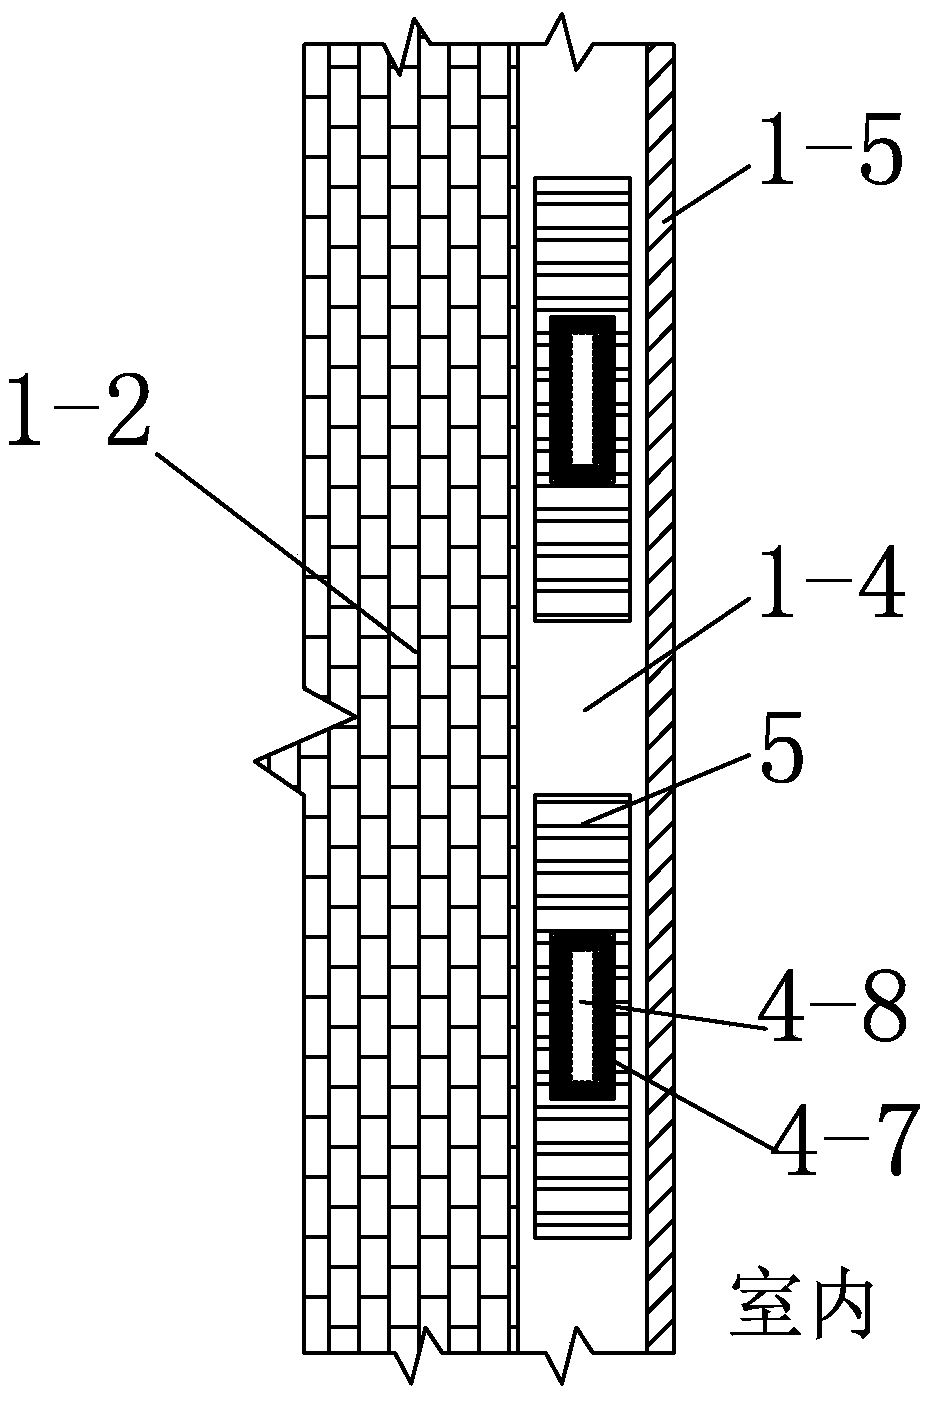 Composite wall for passive ultra-low energy buildings